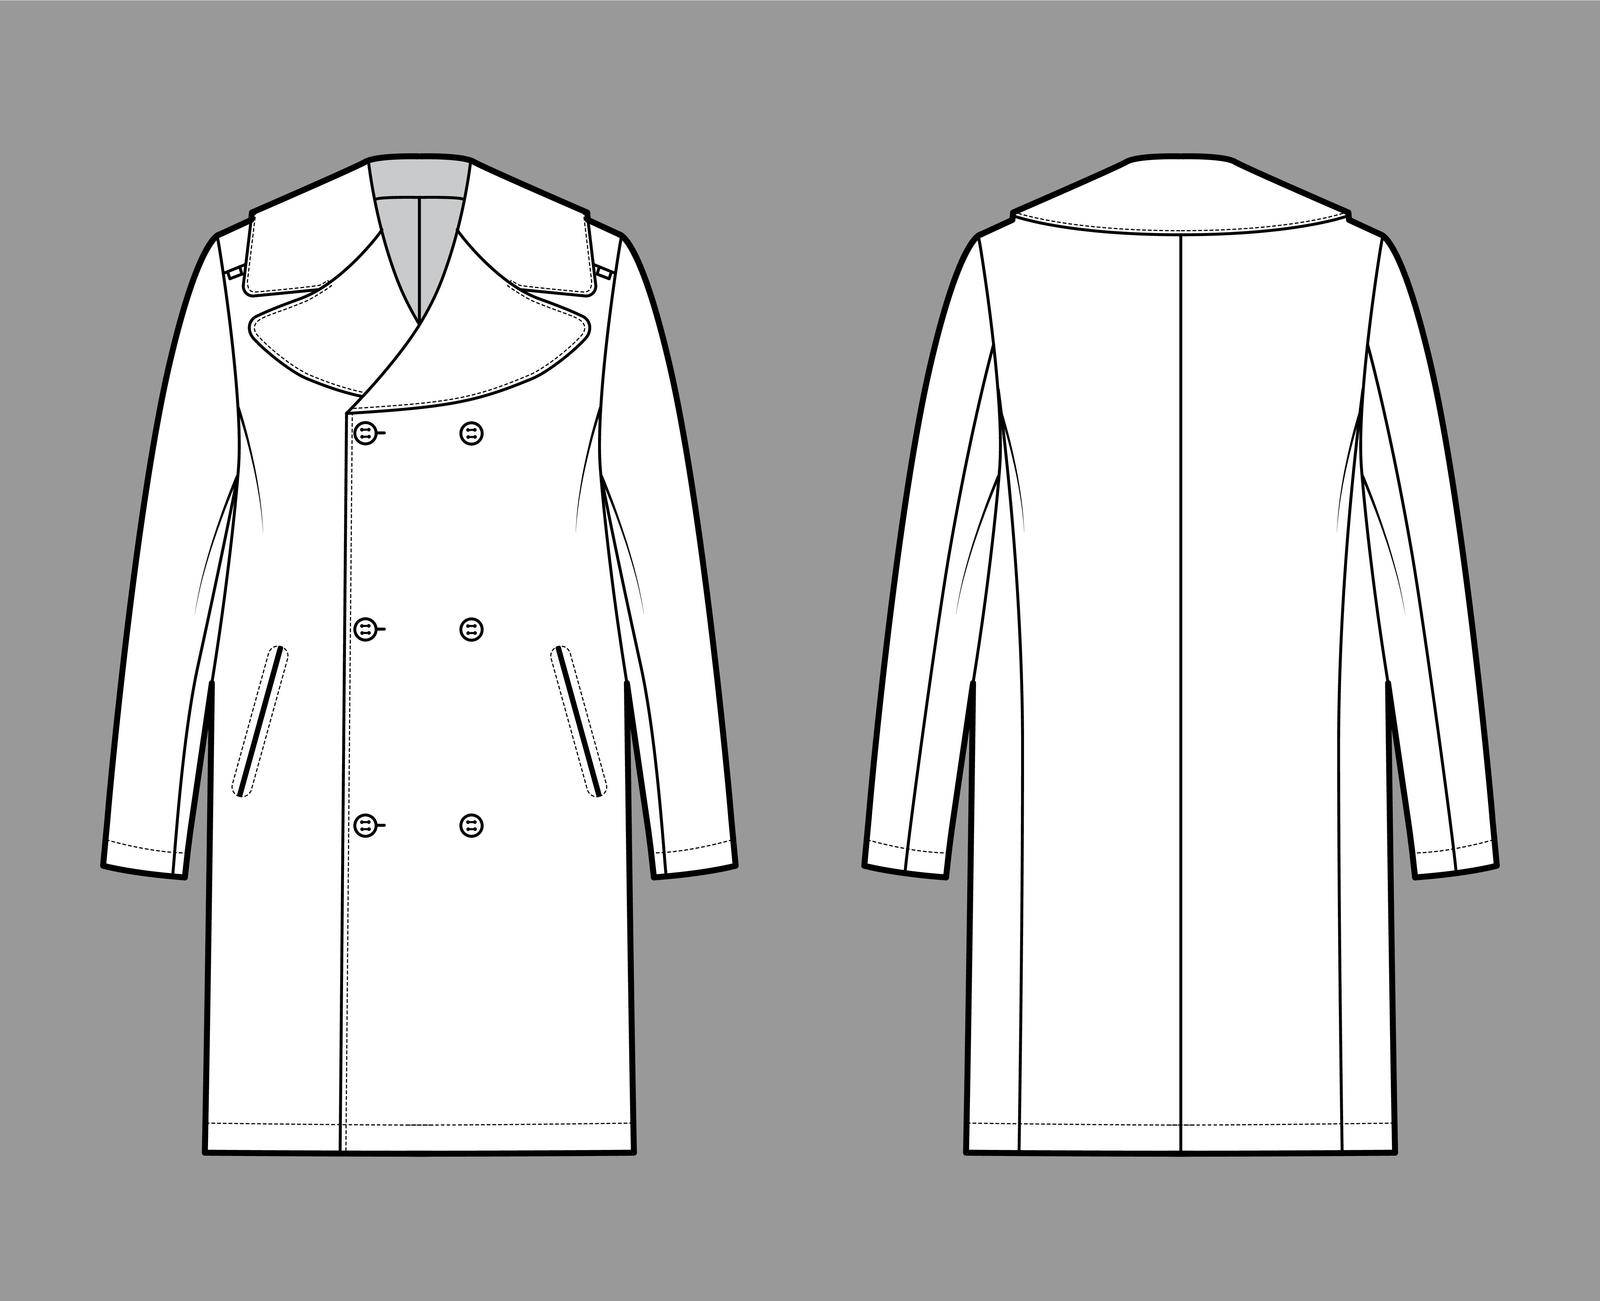 Reefer overcoat technical fashion illustration with double breasted, knee length, tailored button-up collar, epaulettes. Flat jacket template front, back, white color. Women, men unisex top CAD mockup